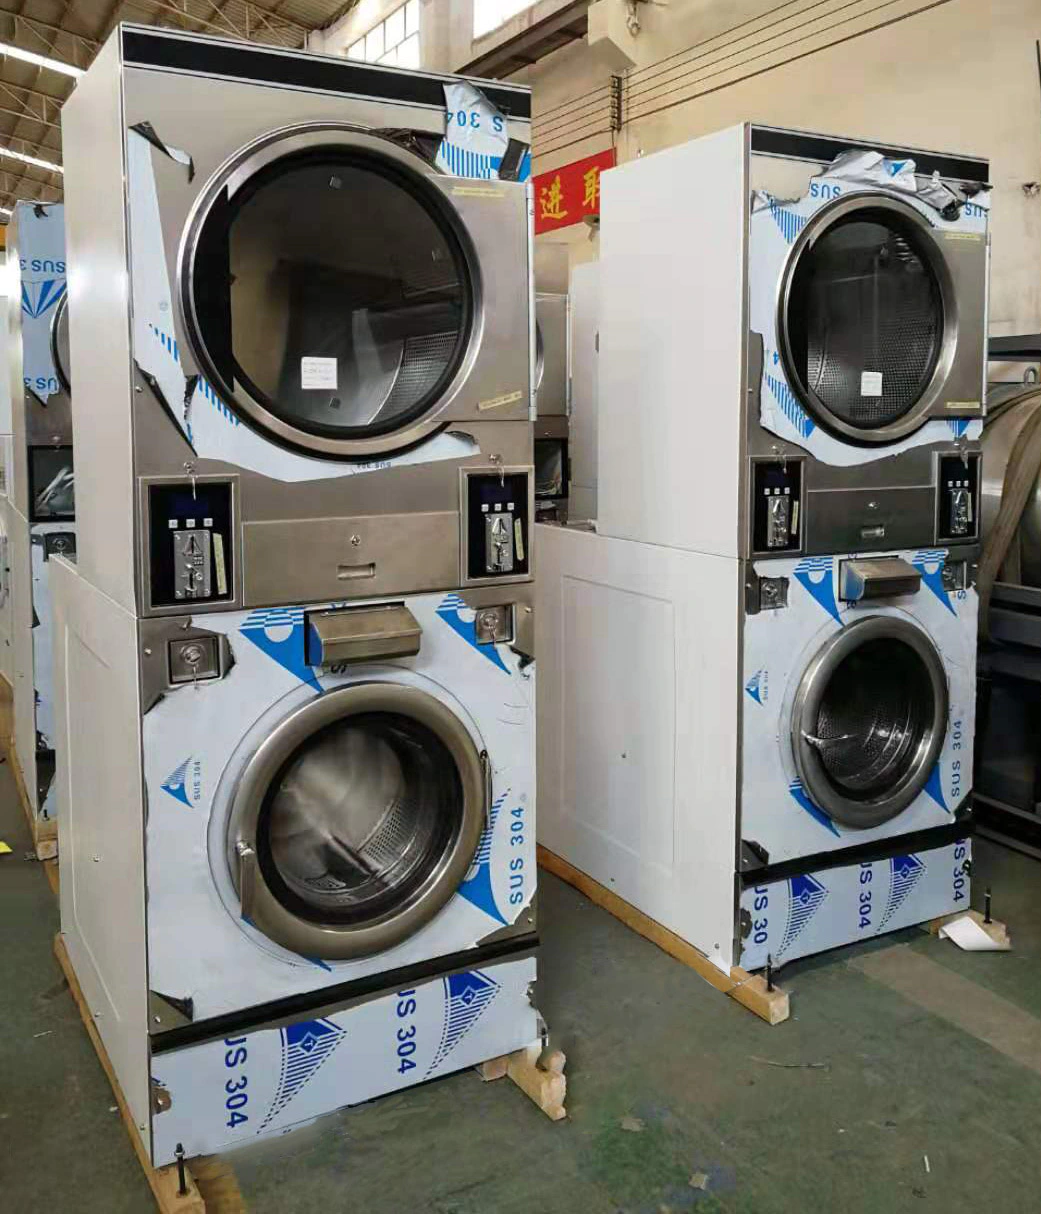 stainless steel self laundry machine clothes Easy to operate for service-service center